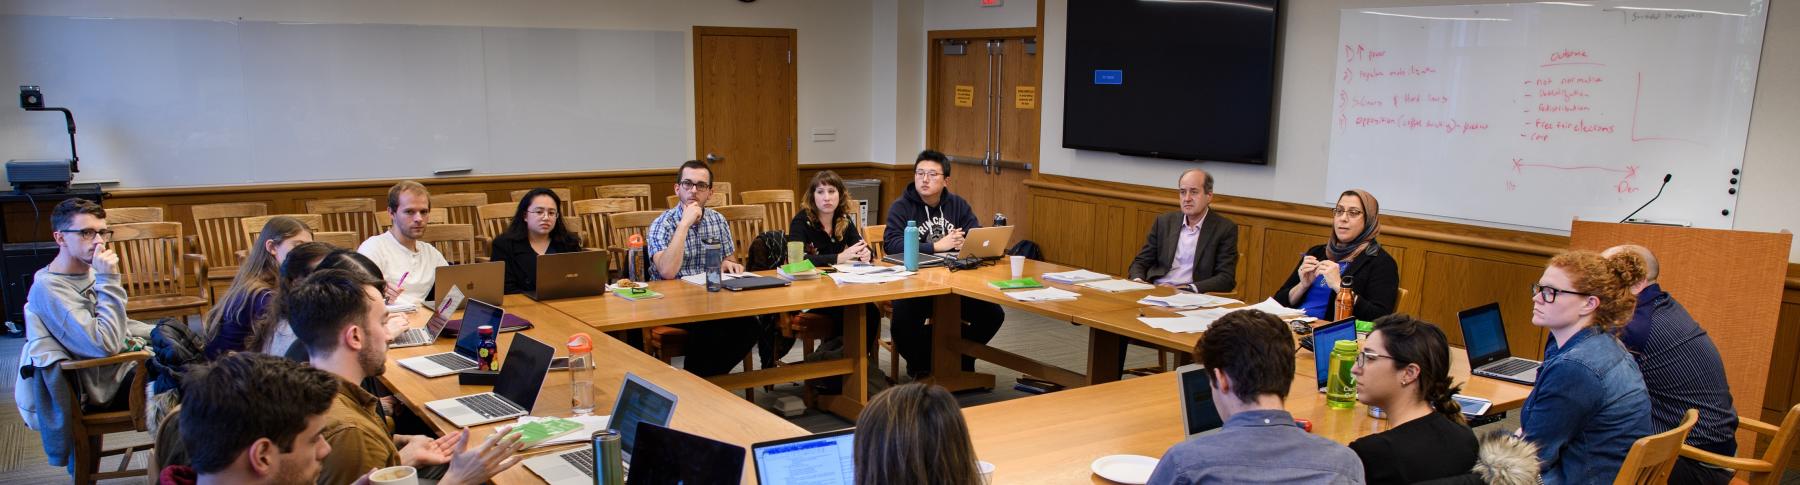 Graduate students and faculty seated around seminar table